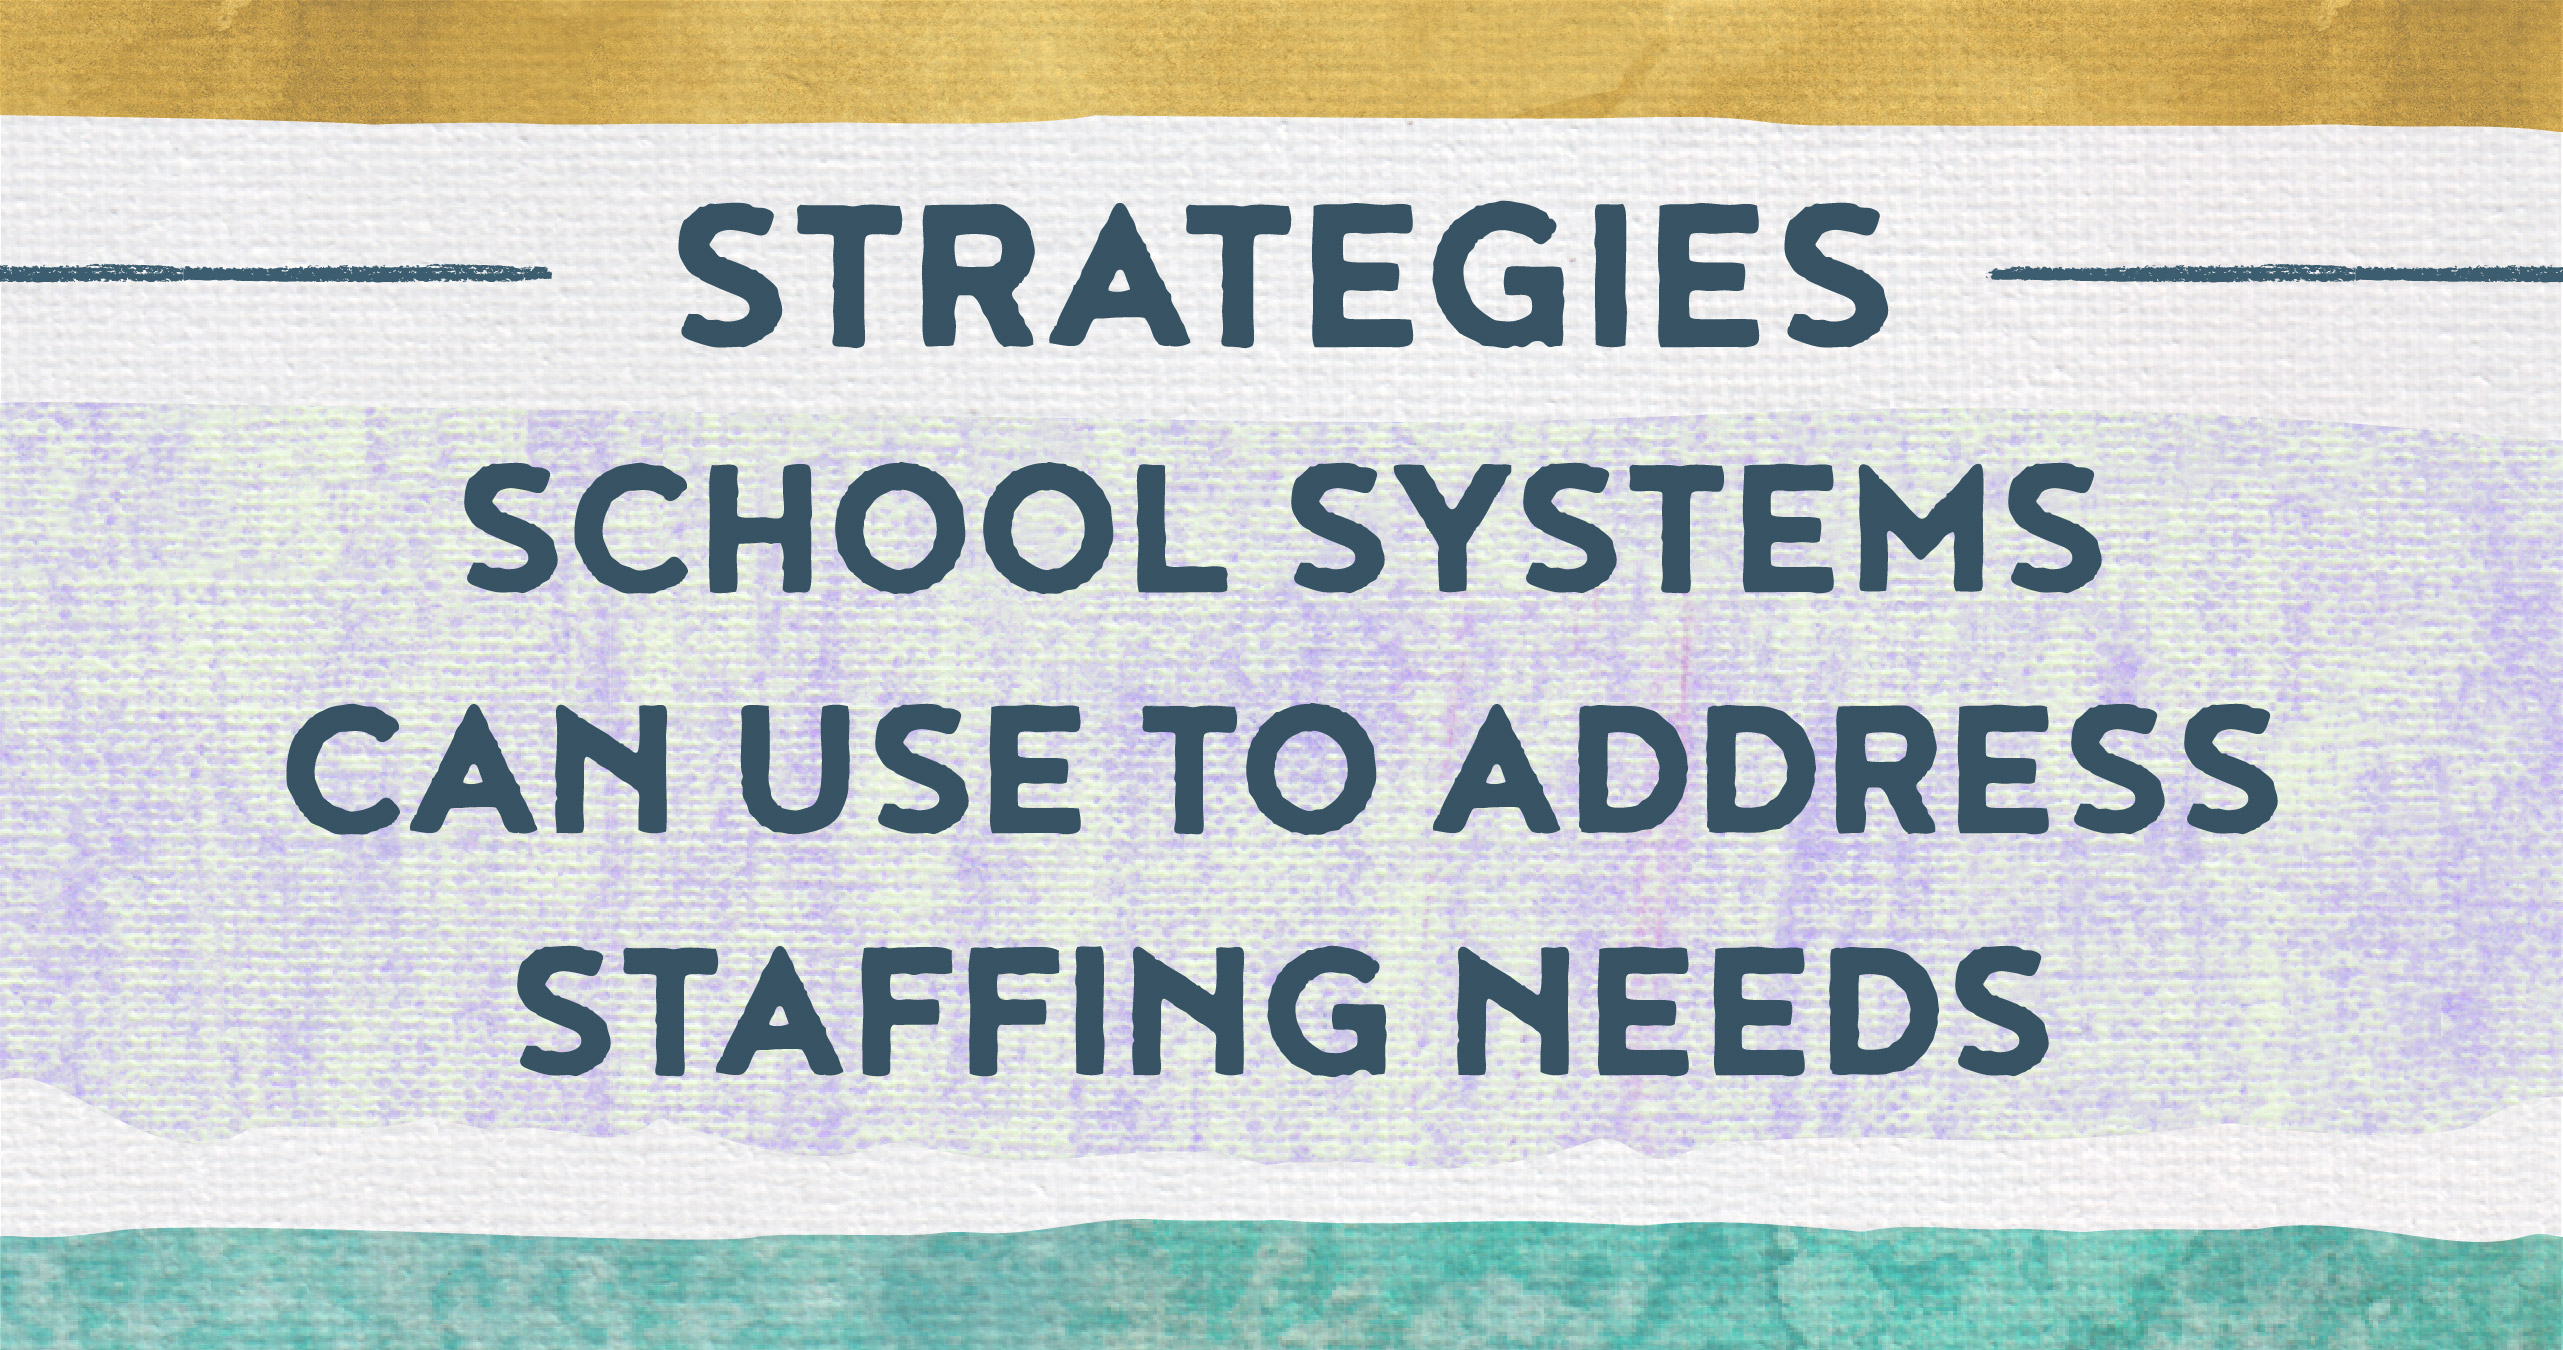 Strategies school systems can use to address staffing needs.